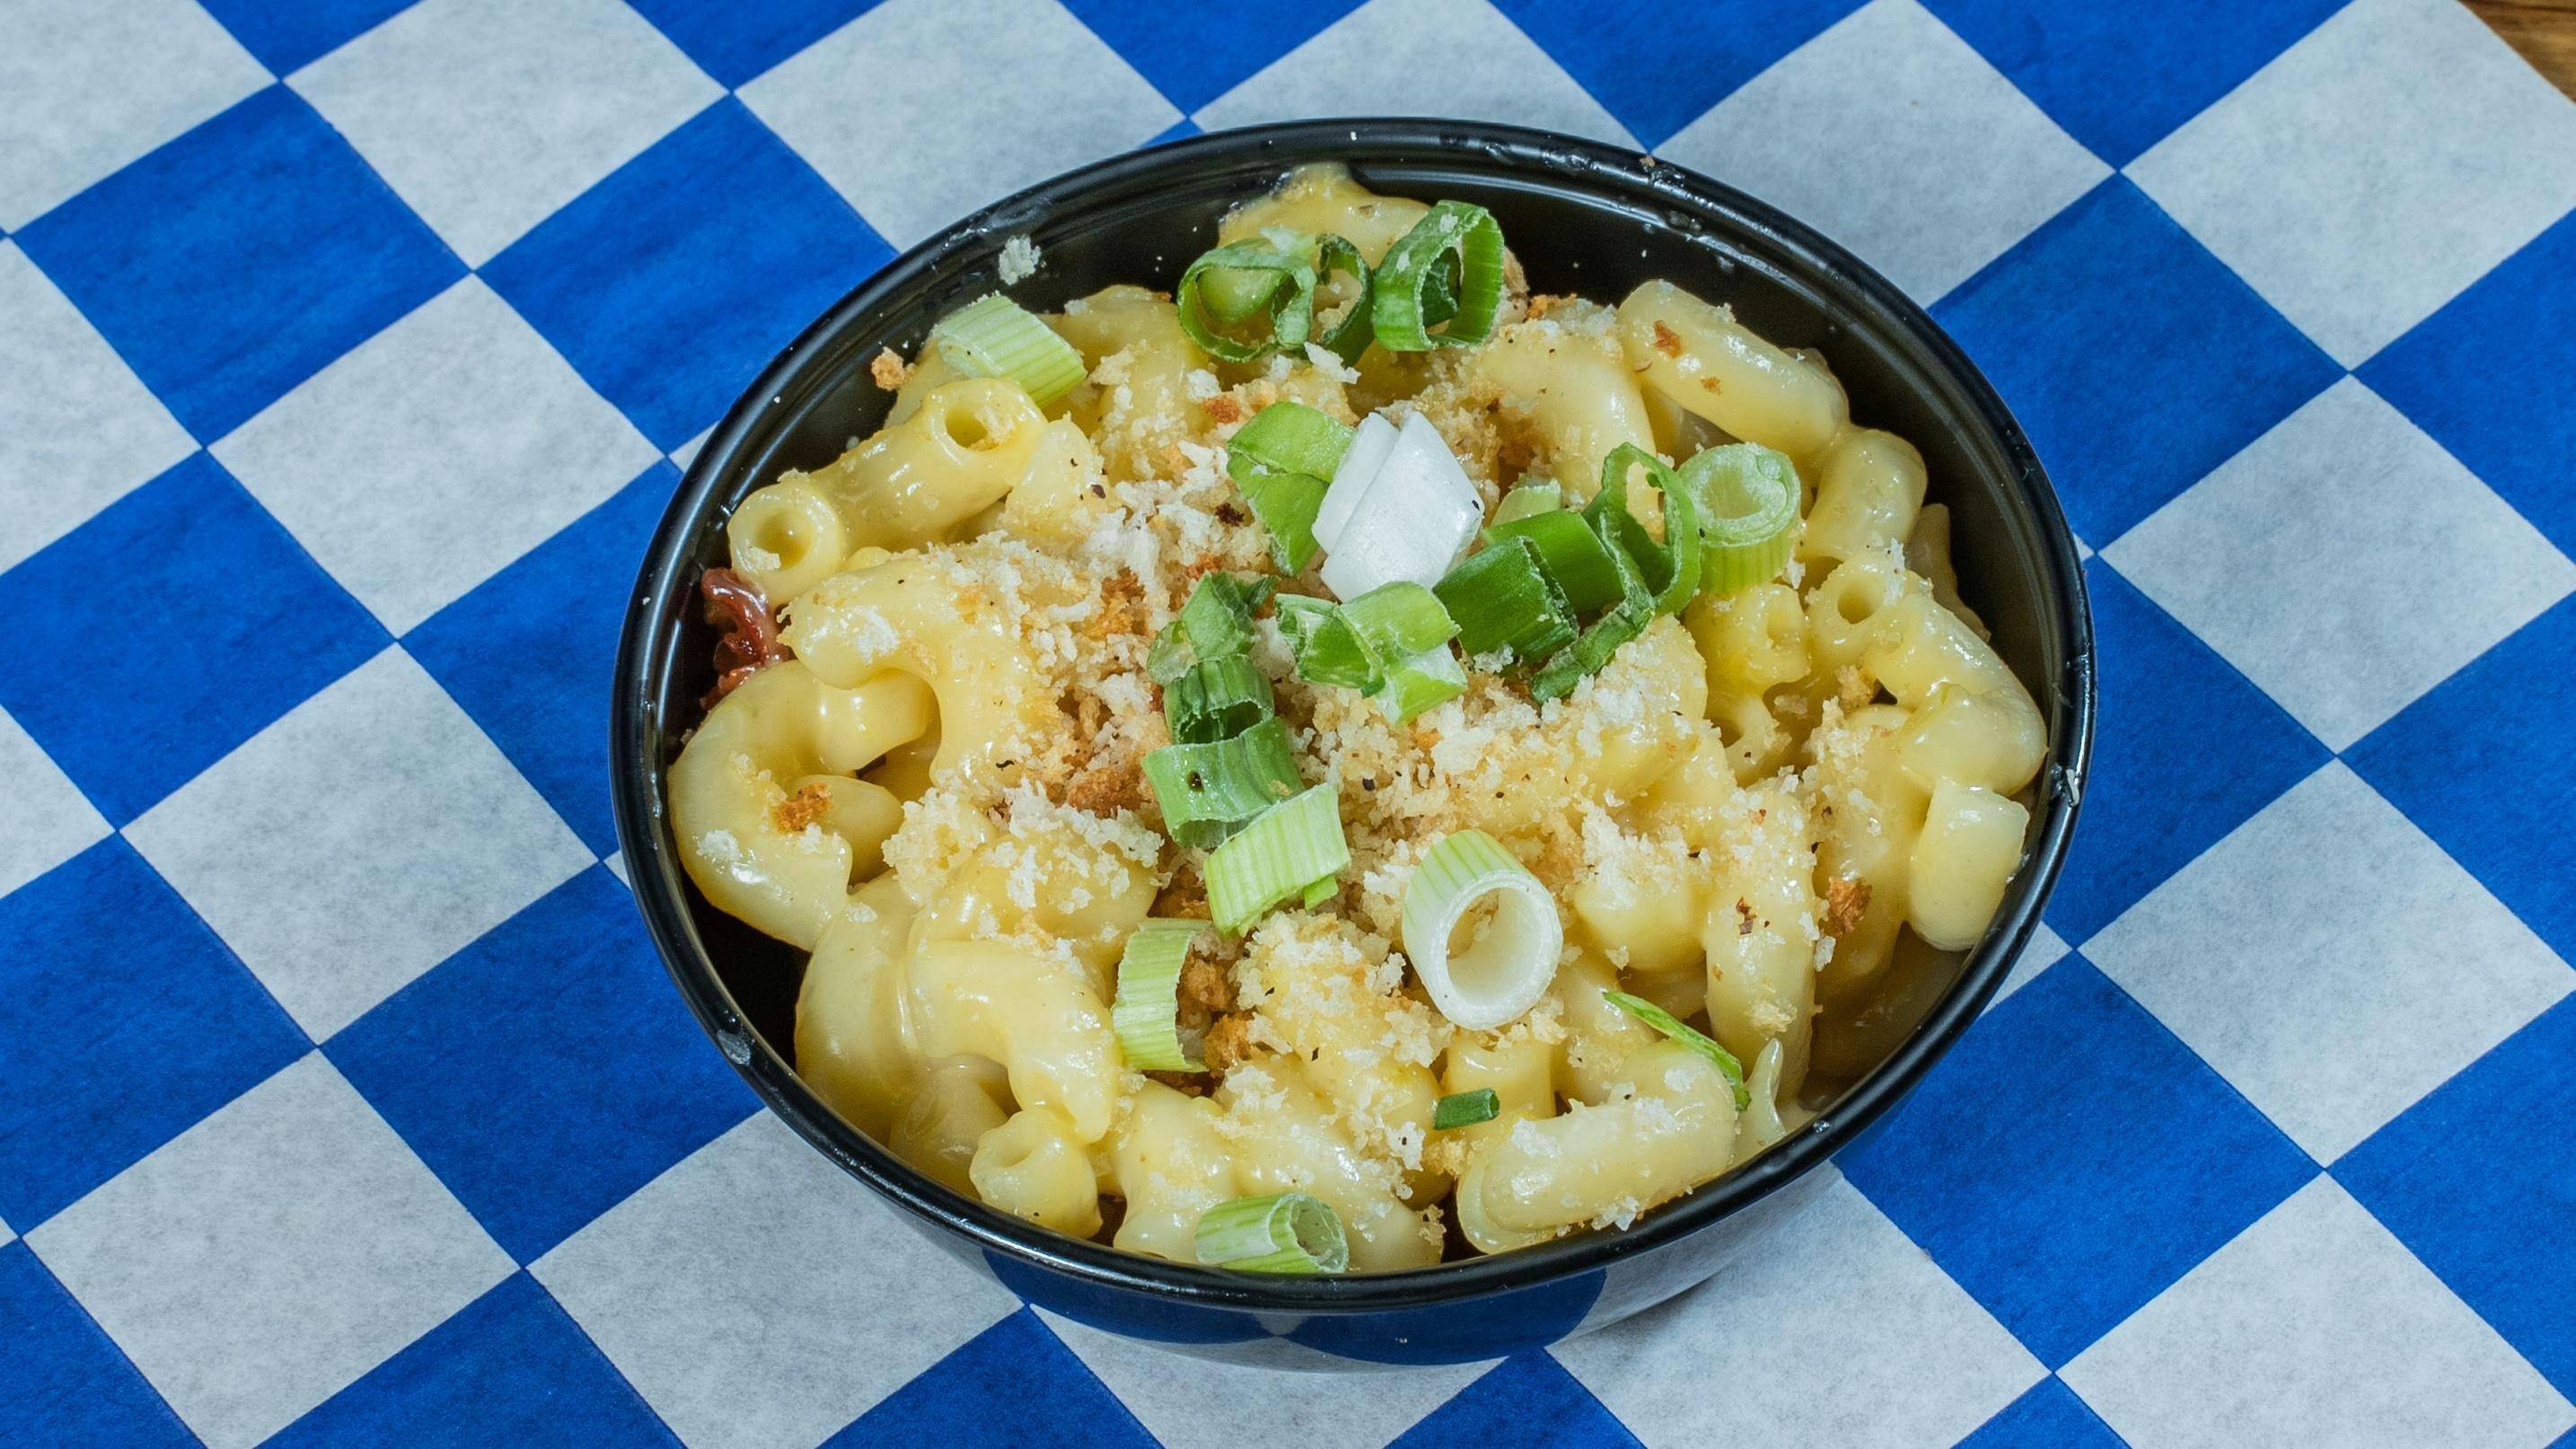 White Cheddar Mac & Cheese from Happy Chicks - Research Blvd in Austin, TX